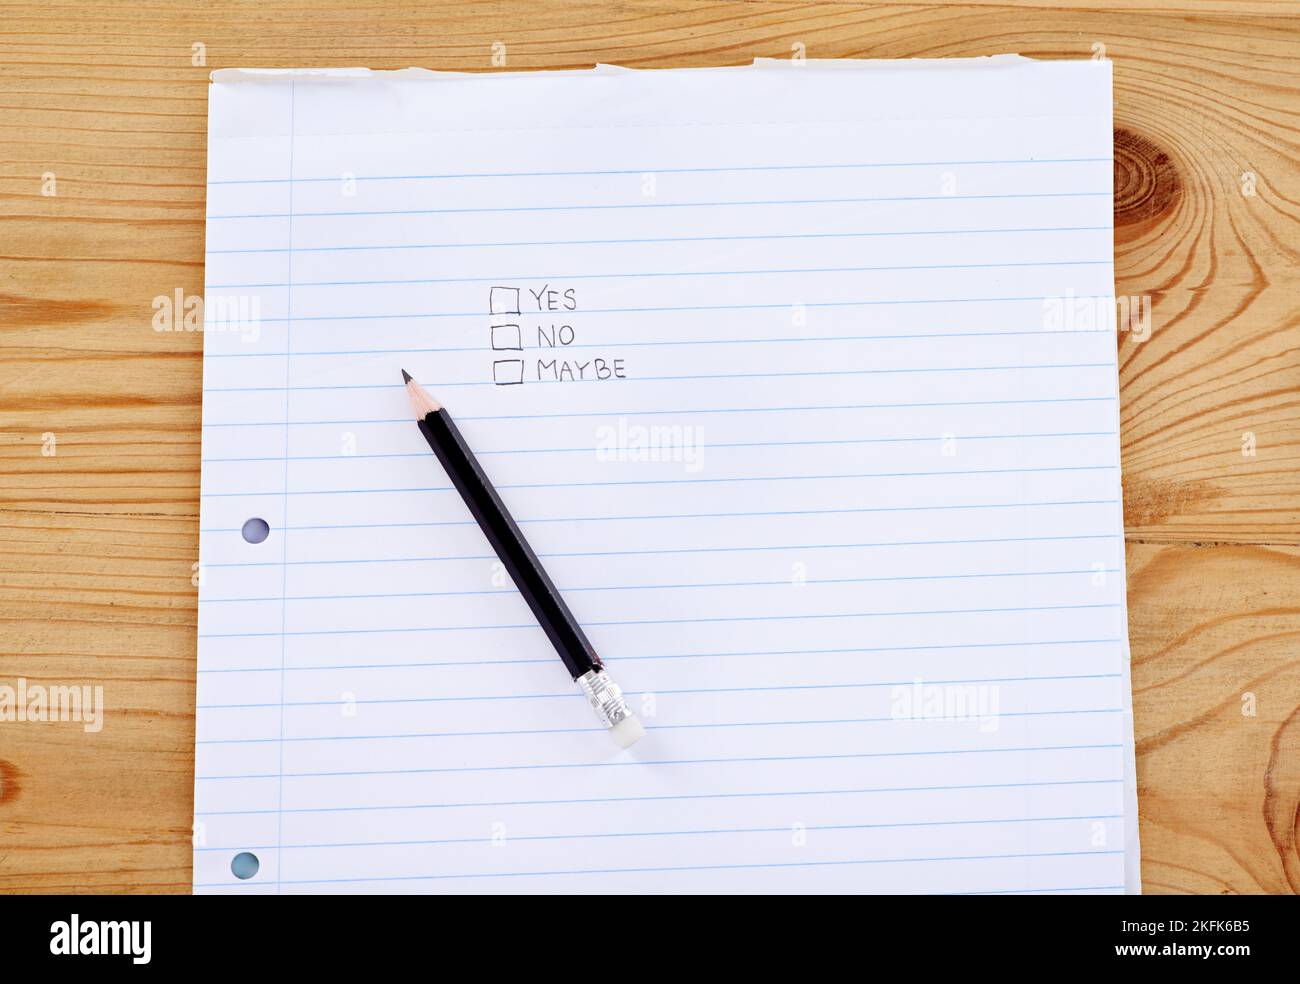 What will it be. A writing pad with the words yes, no and maybe in check boxes. Stock Photo